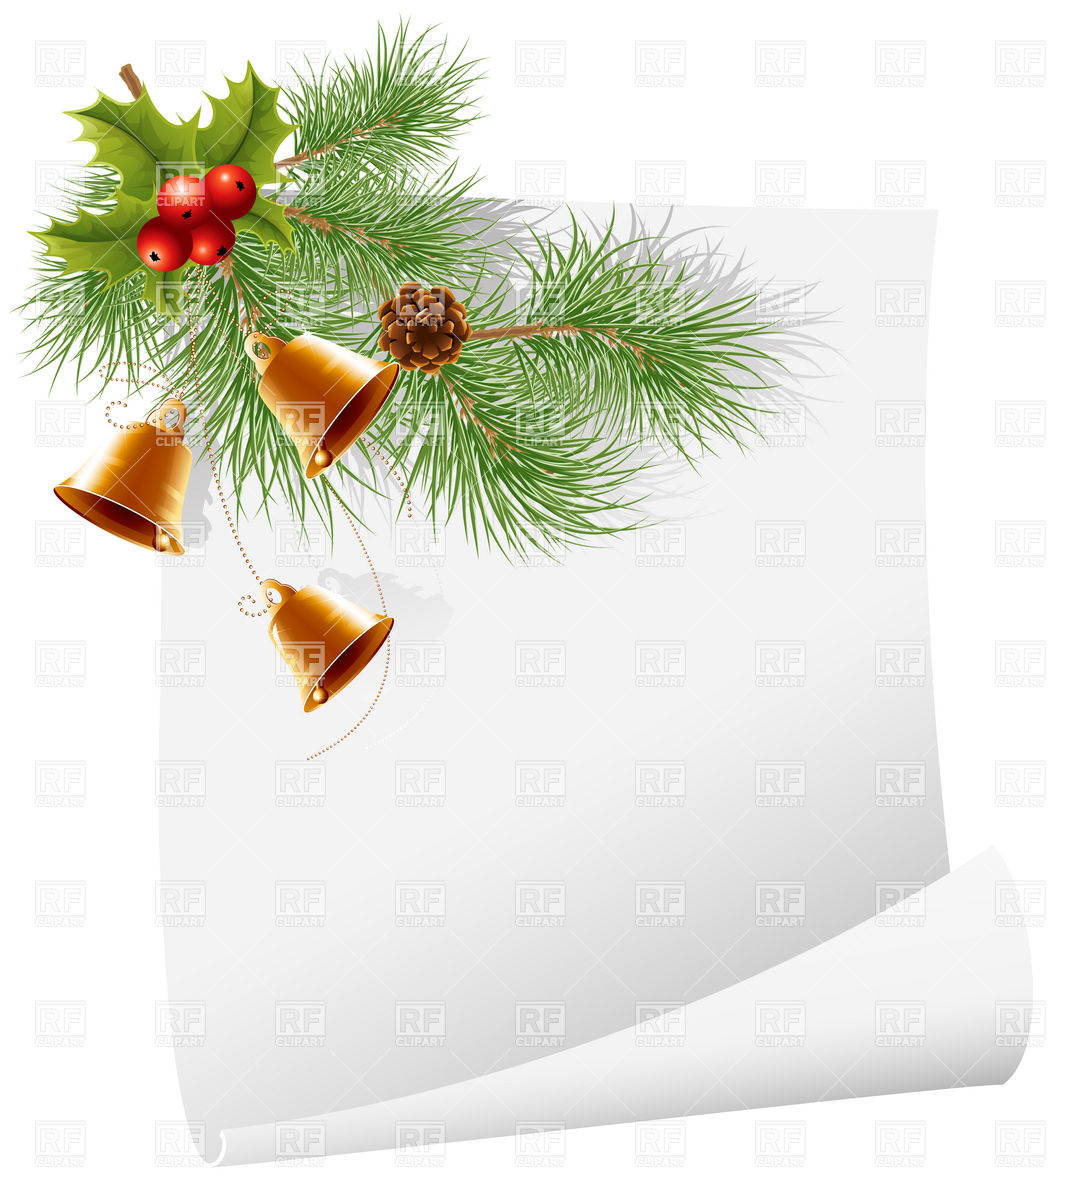 Blank Christmas Greetings Card With Bells And Pine Branch Borders And